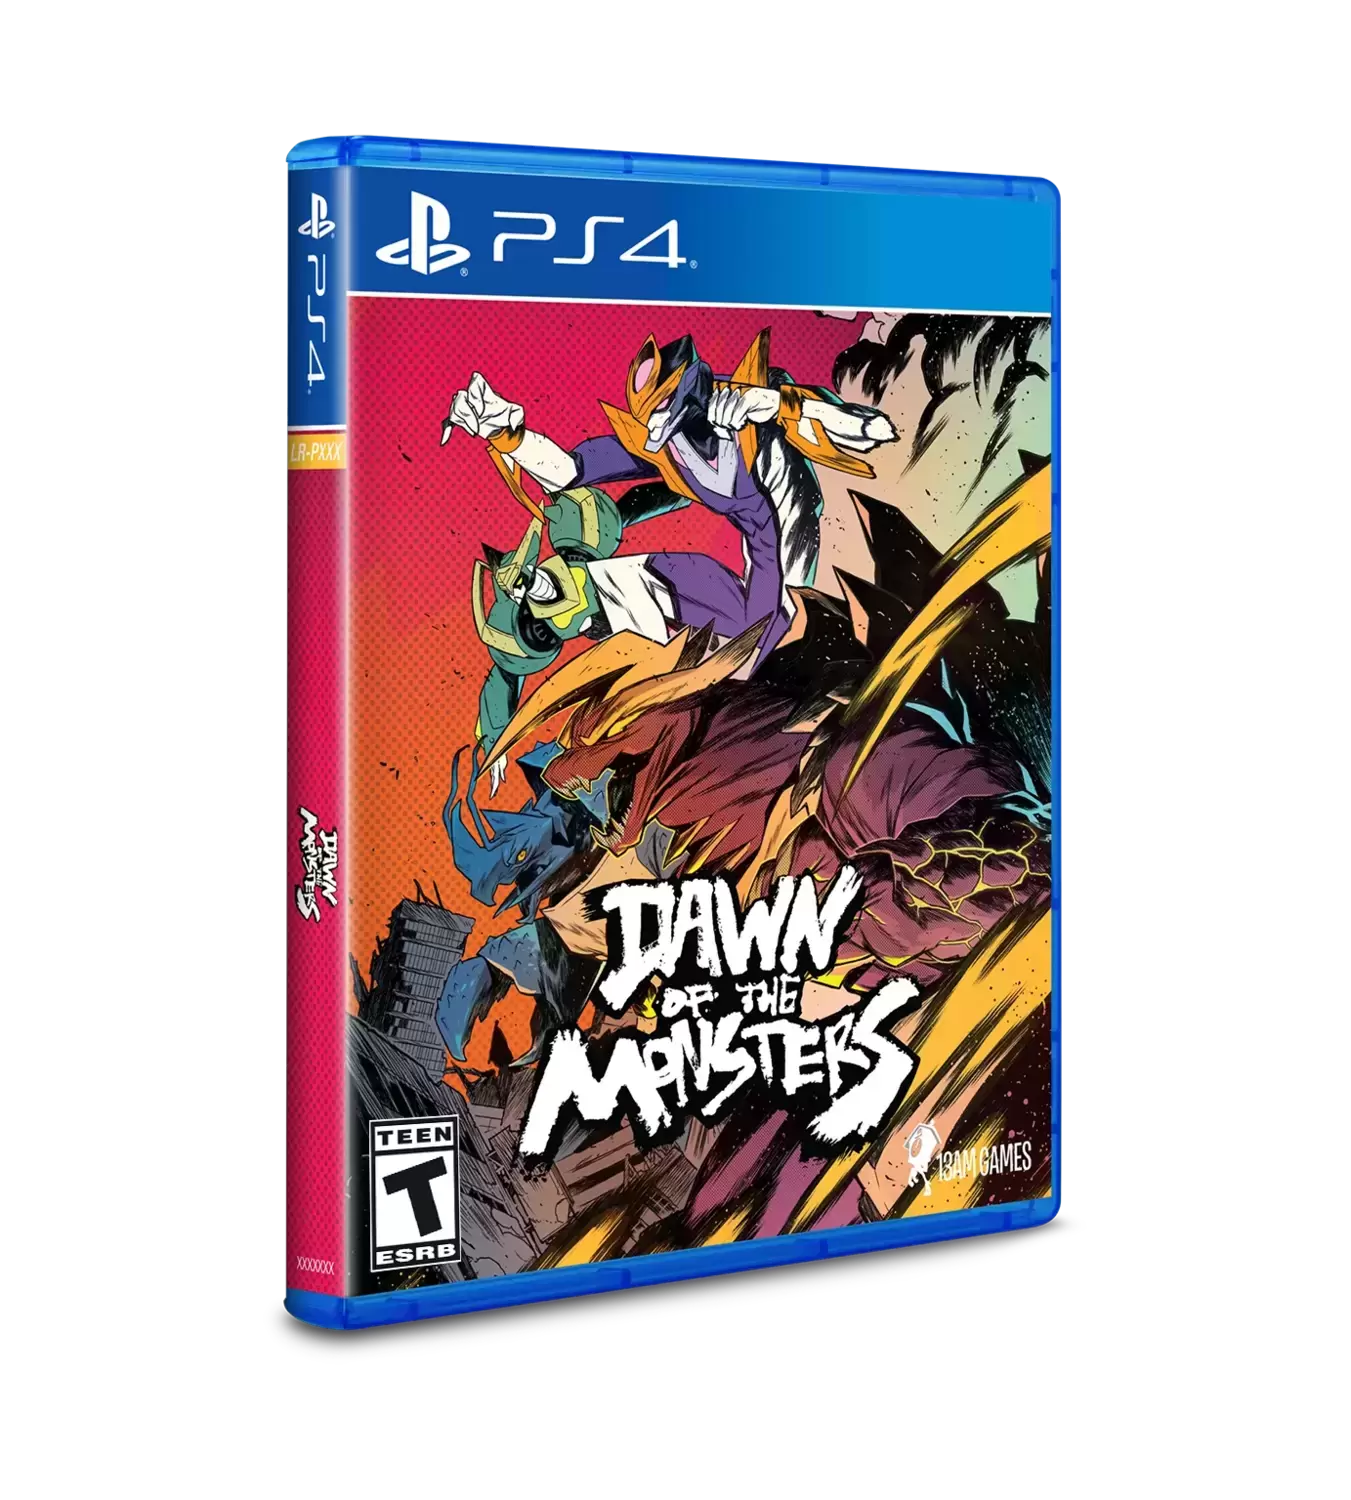 PS4 Games - Dawn of the Monsters